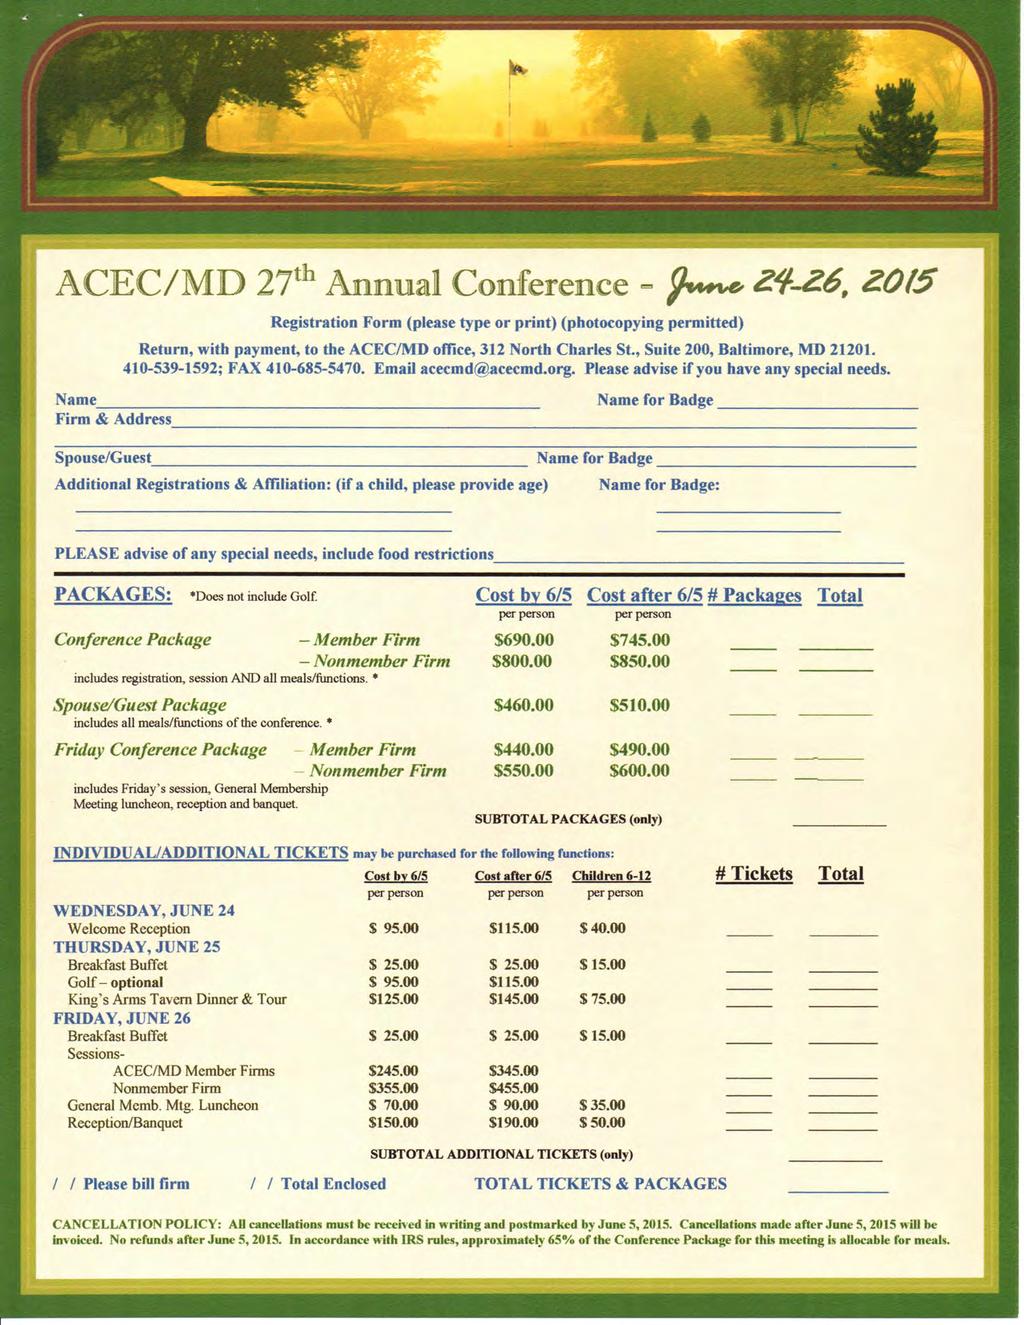 ACEC/MD 27"' Annual Conference - Registration Form (please type or print) (photocopying permitted) Return, with payment, to the ACEC/MD office, 312 North Charles St., Suite 200, Baltimore, MD 21201.